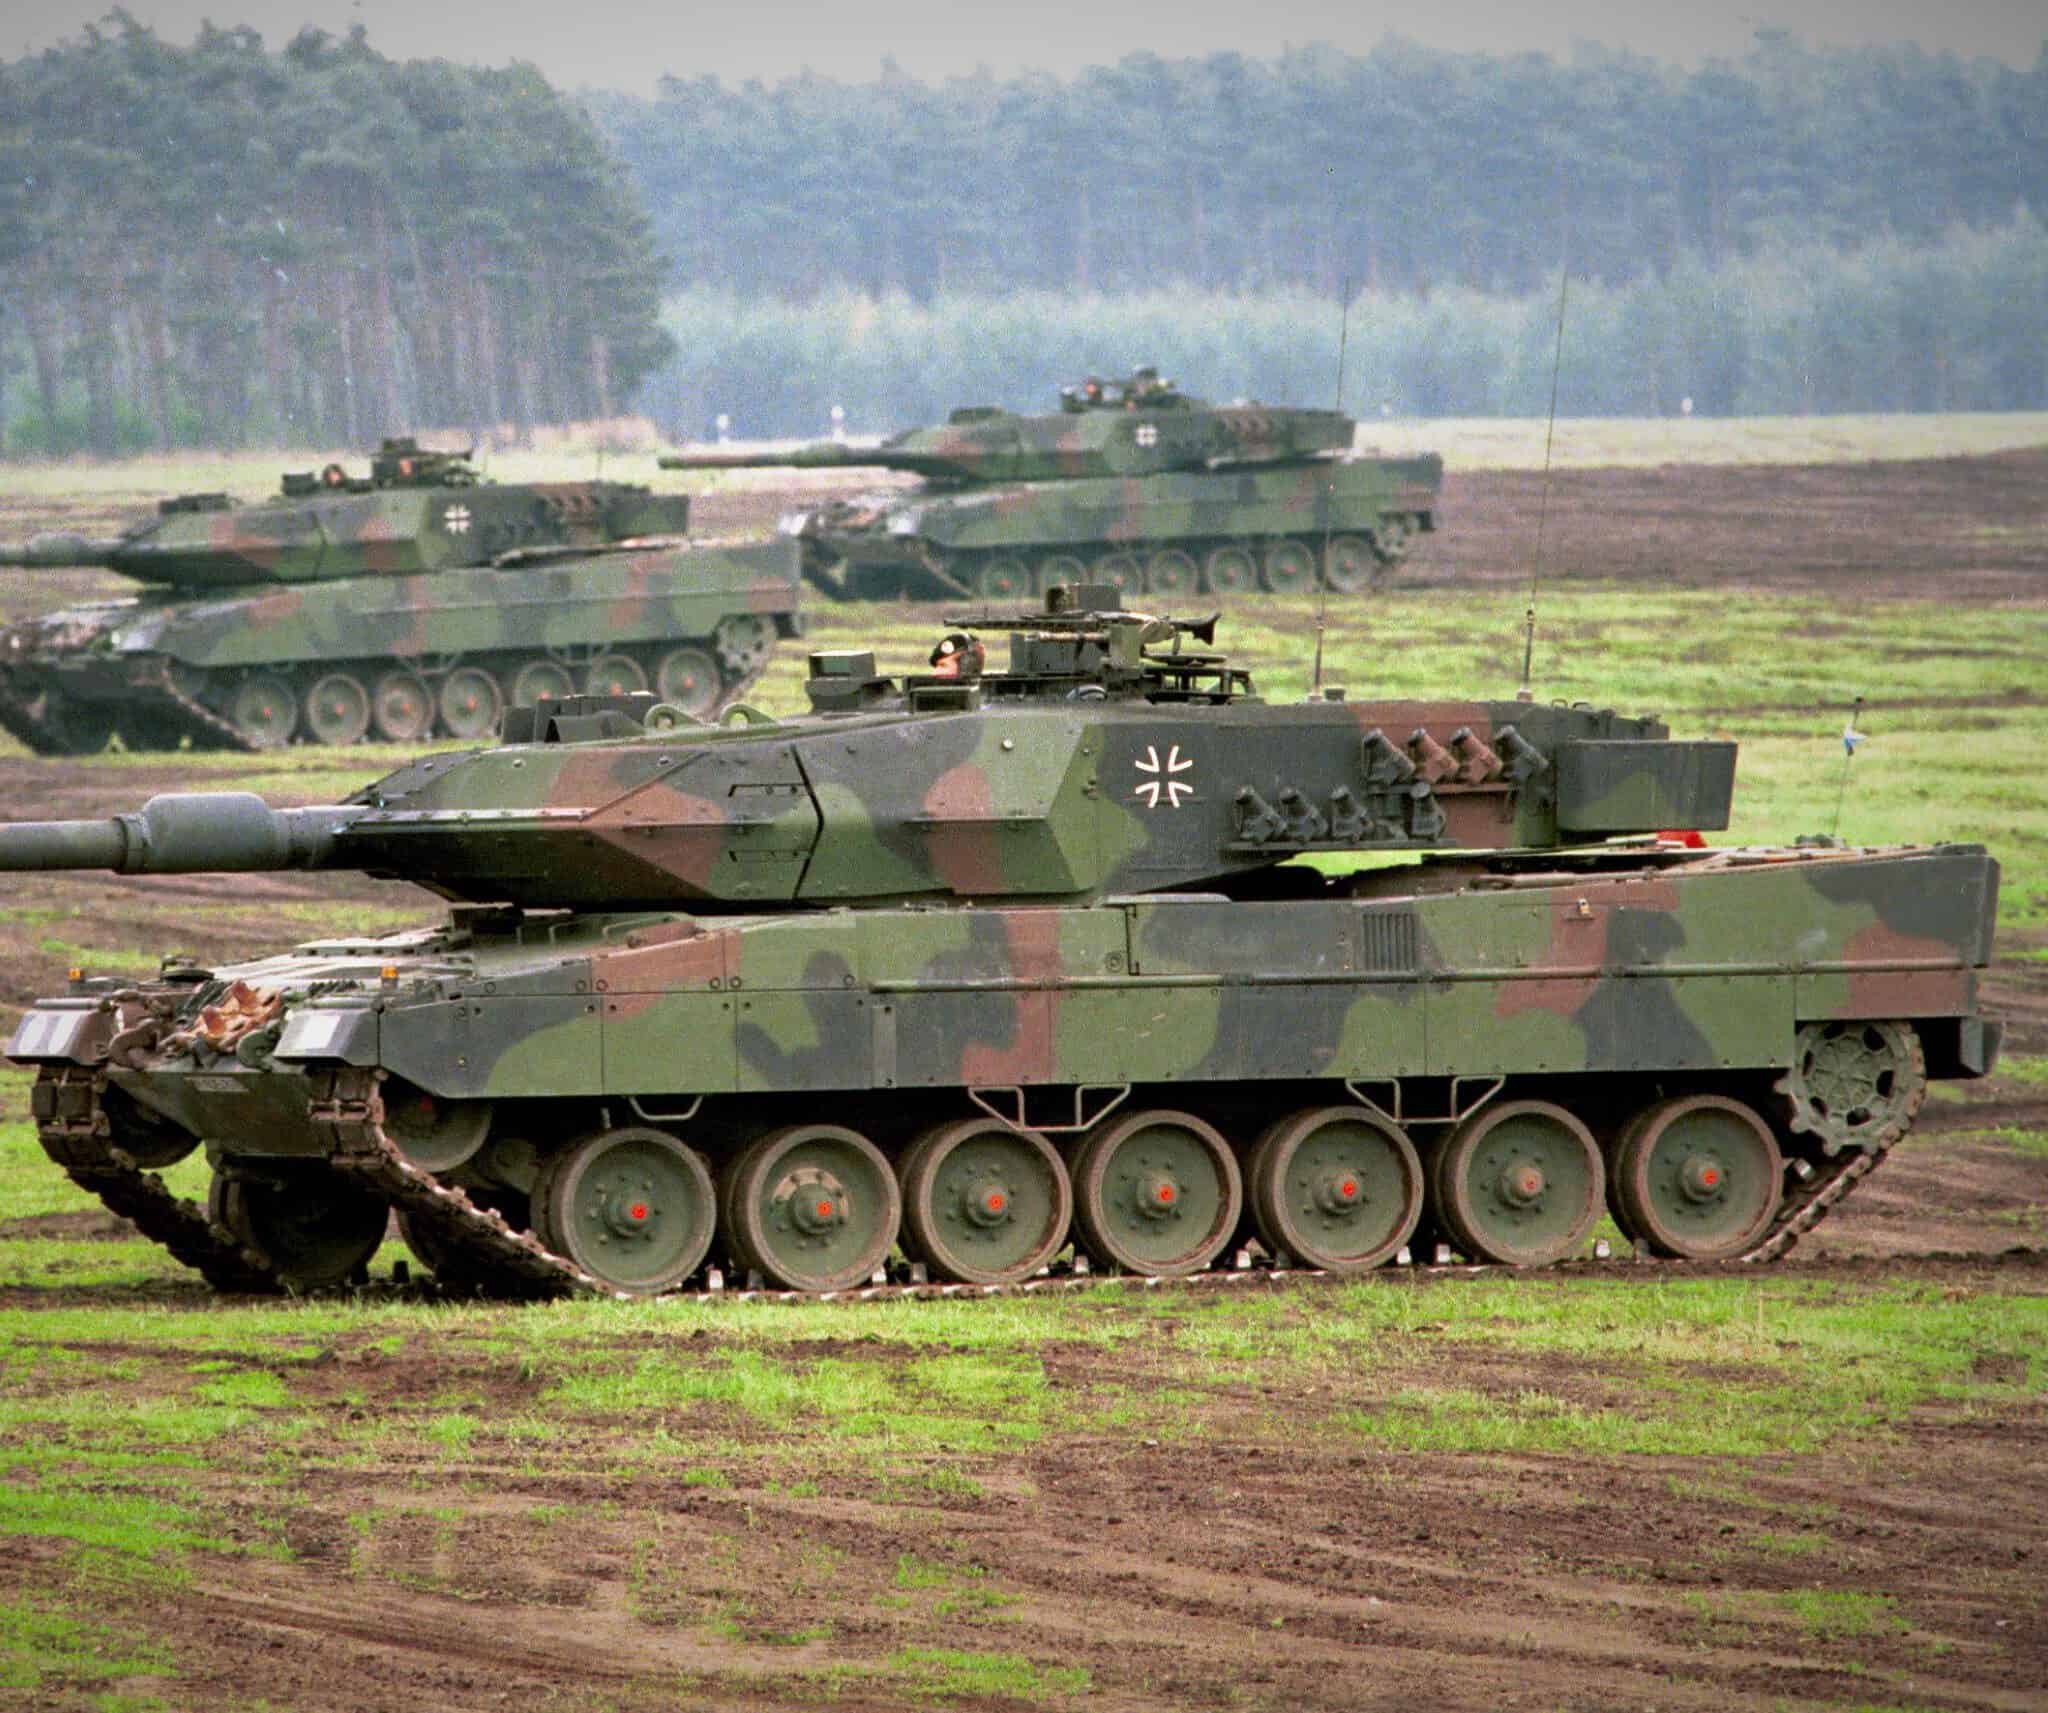 12 Best Military Tanks In The World In 2023